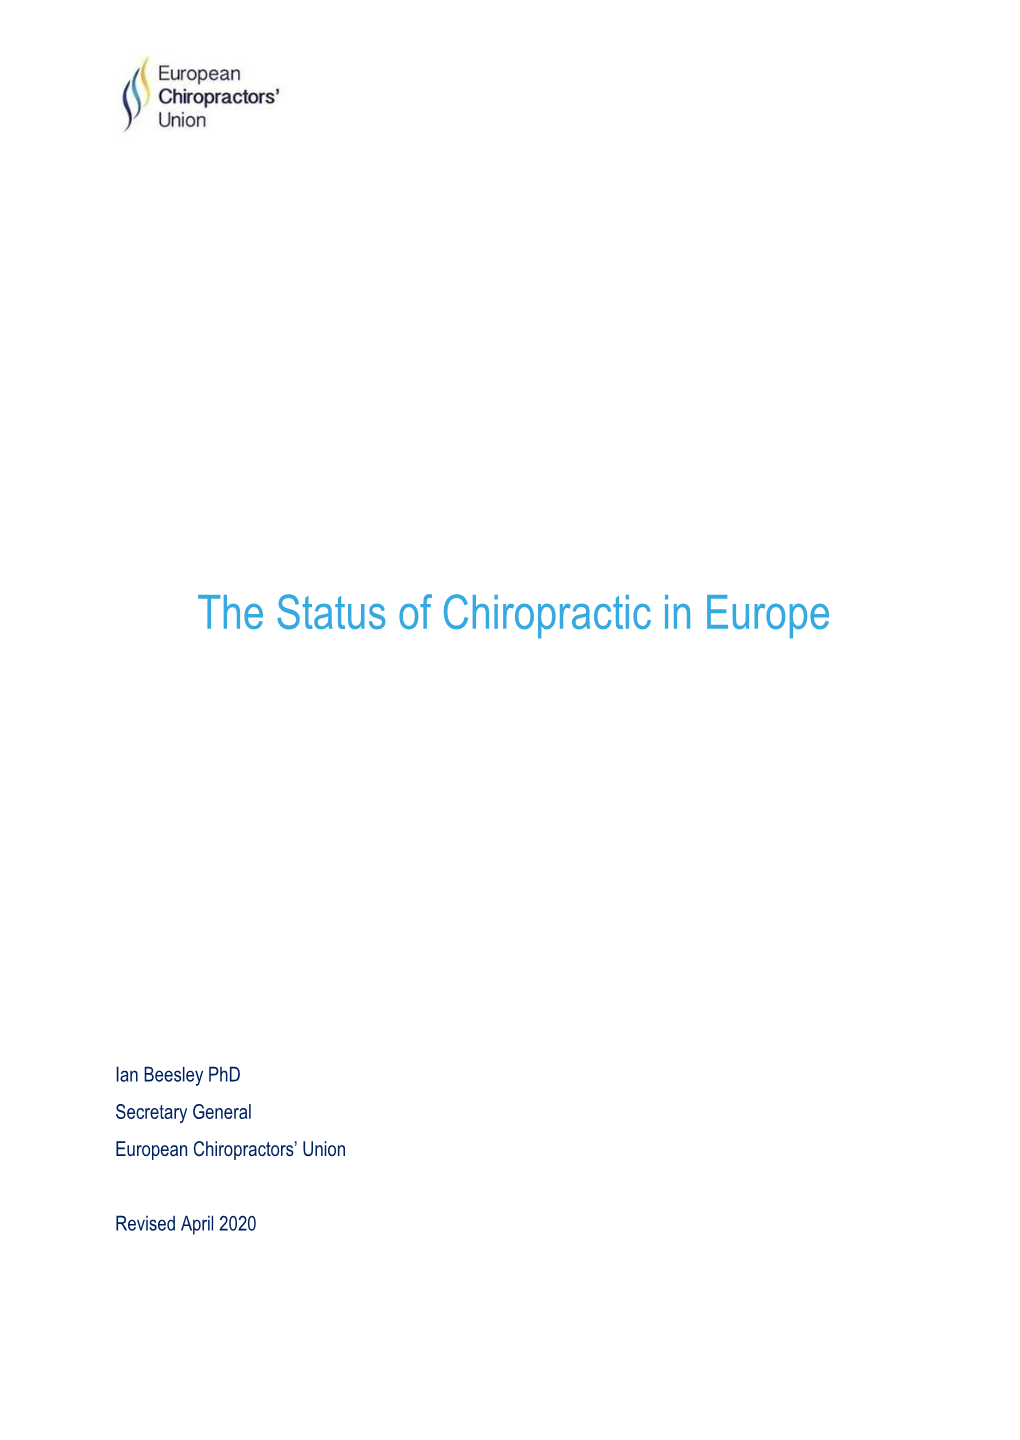 The Status of Chiropractic in Europe